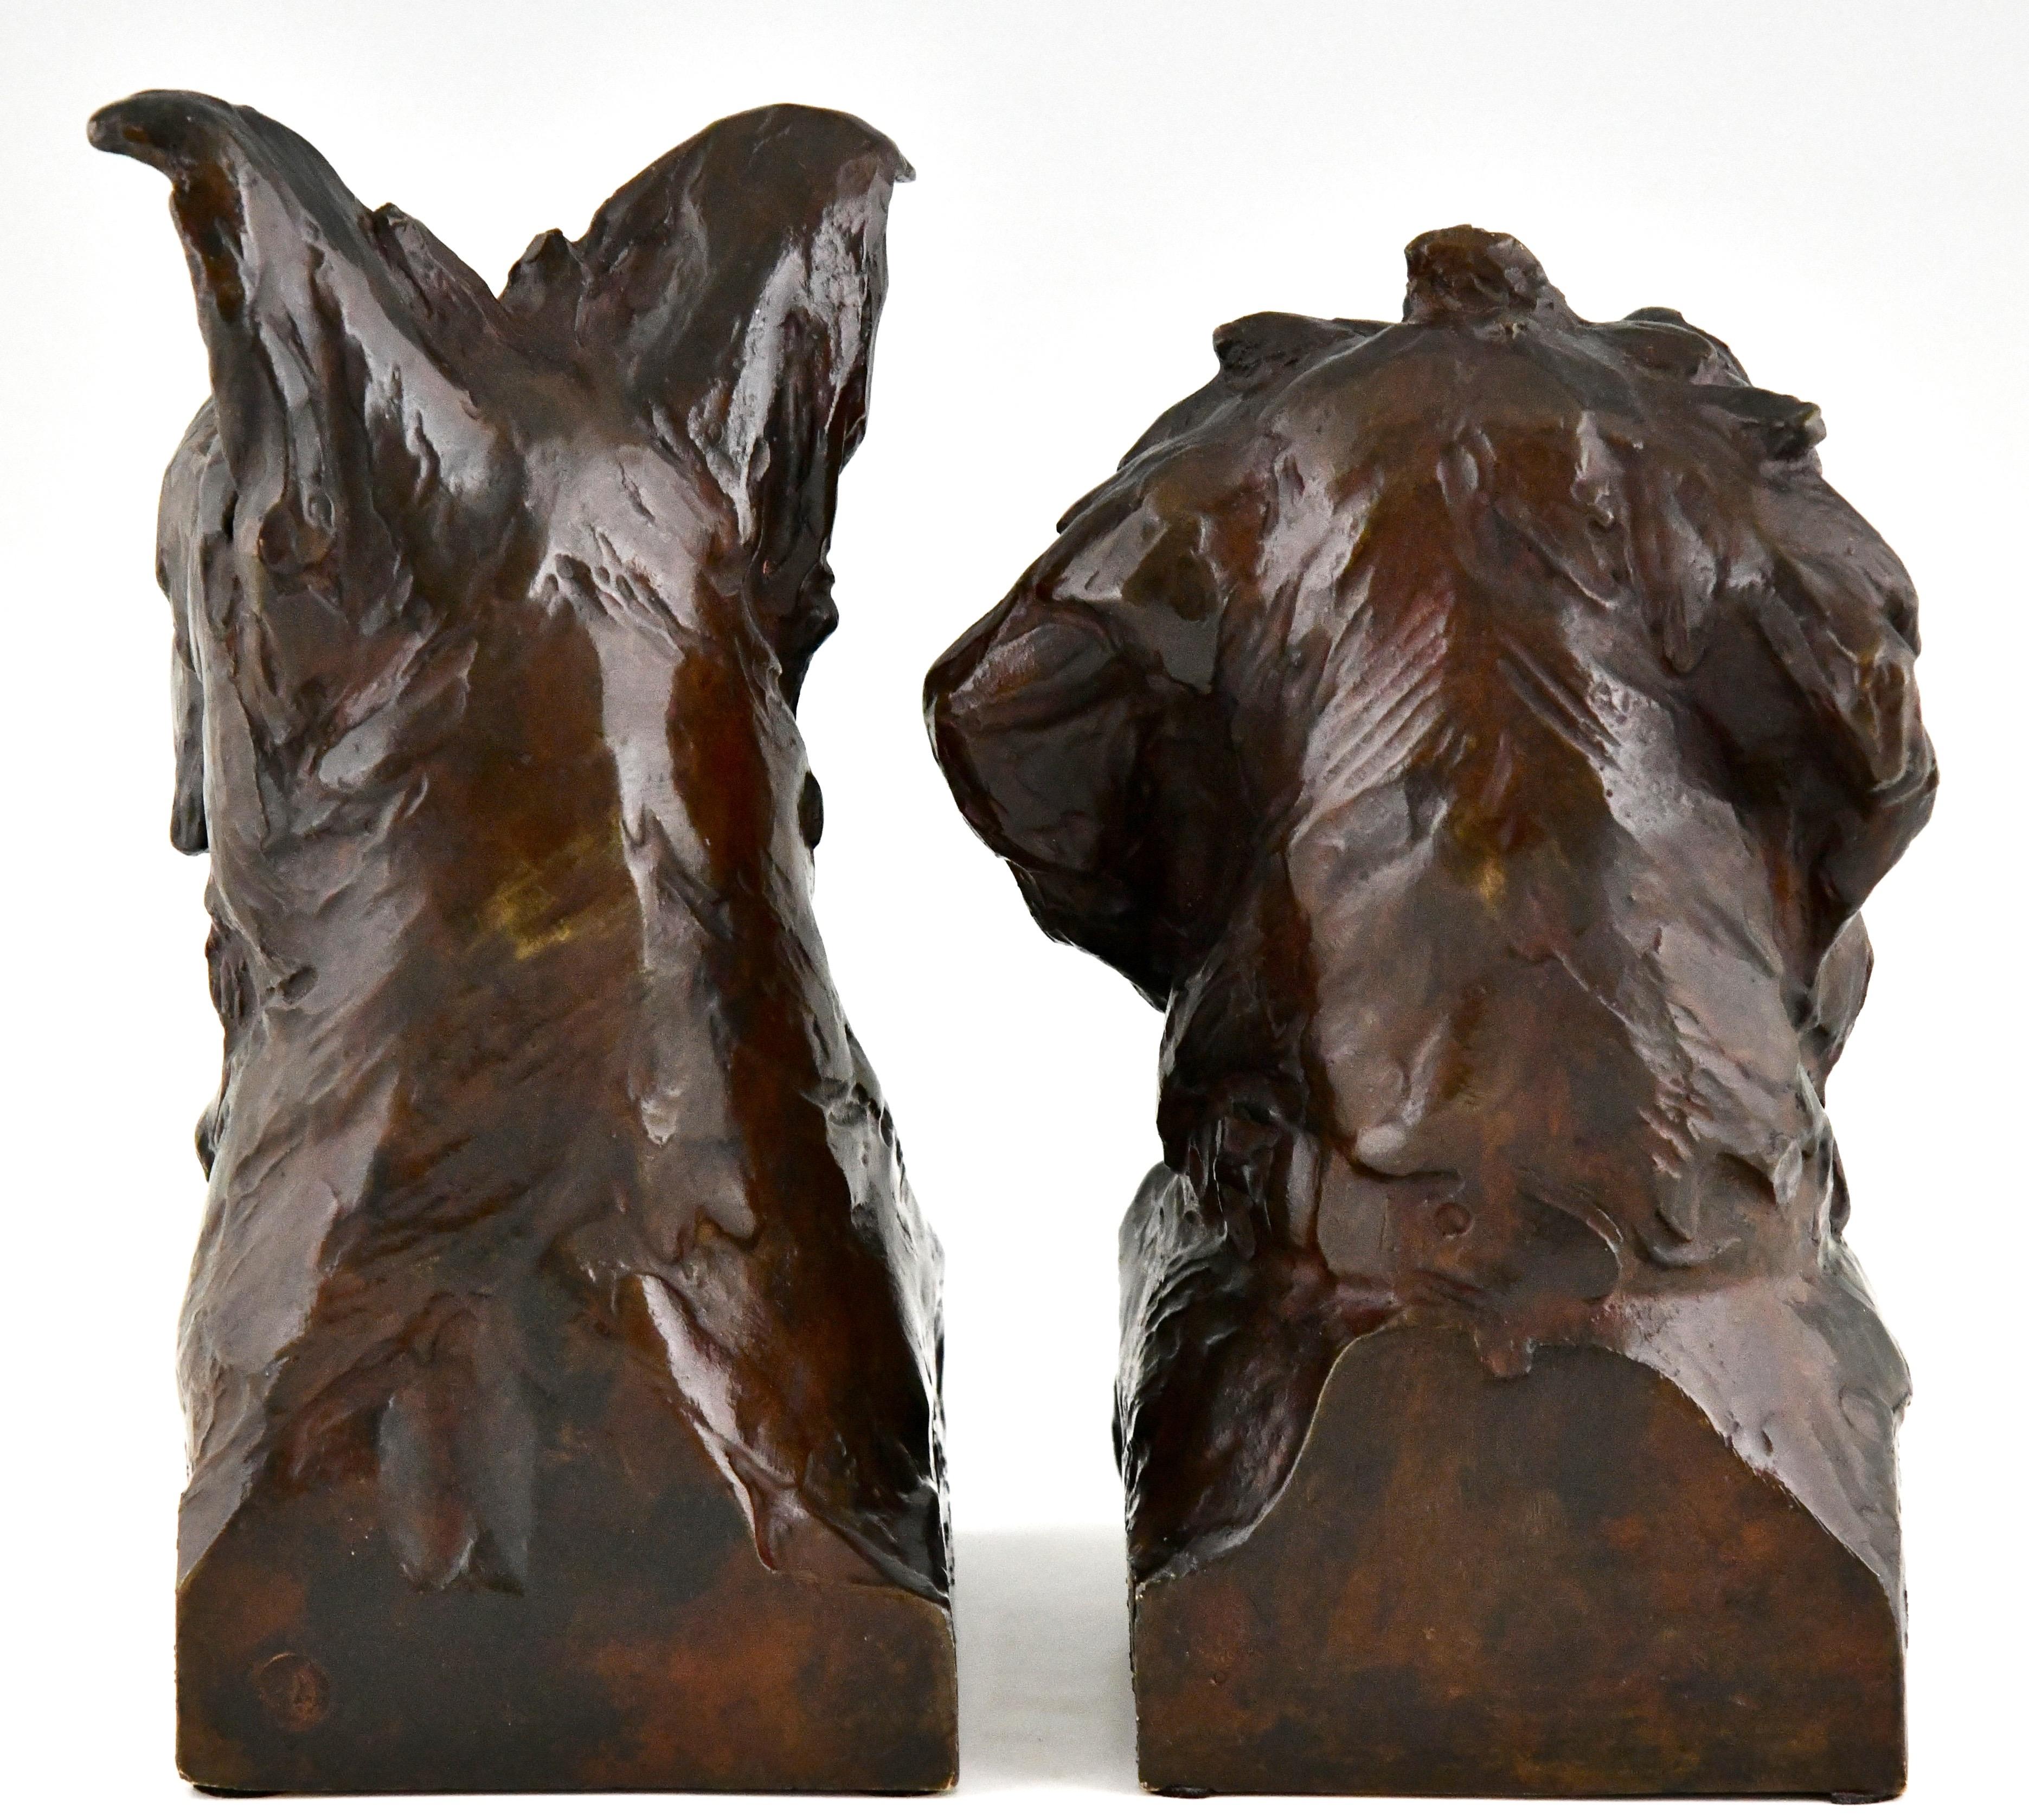 Patinated Art Deco Bronze Sculpture Terrier Dog Bookends by L. Fiot, Susse Frères Foundry